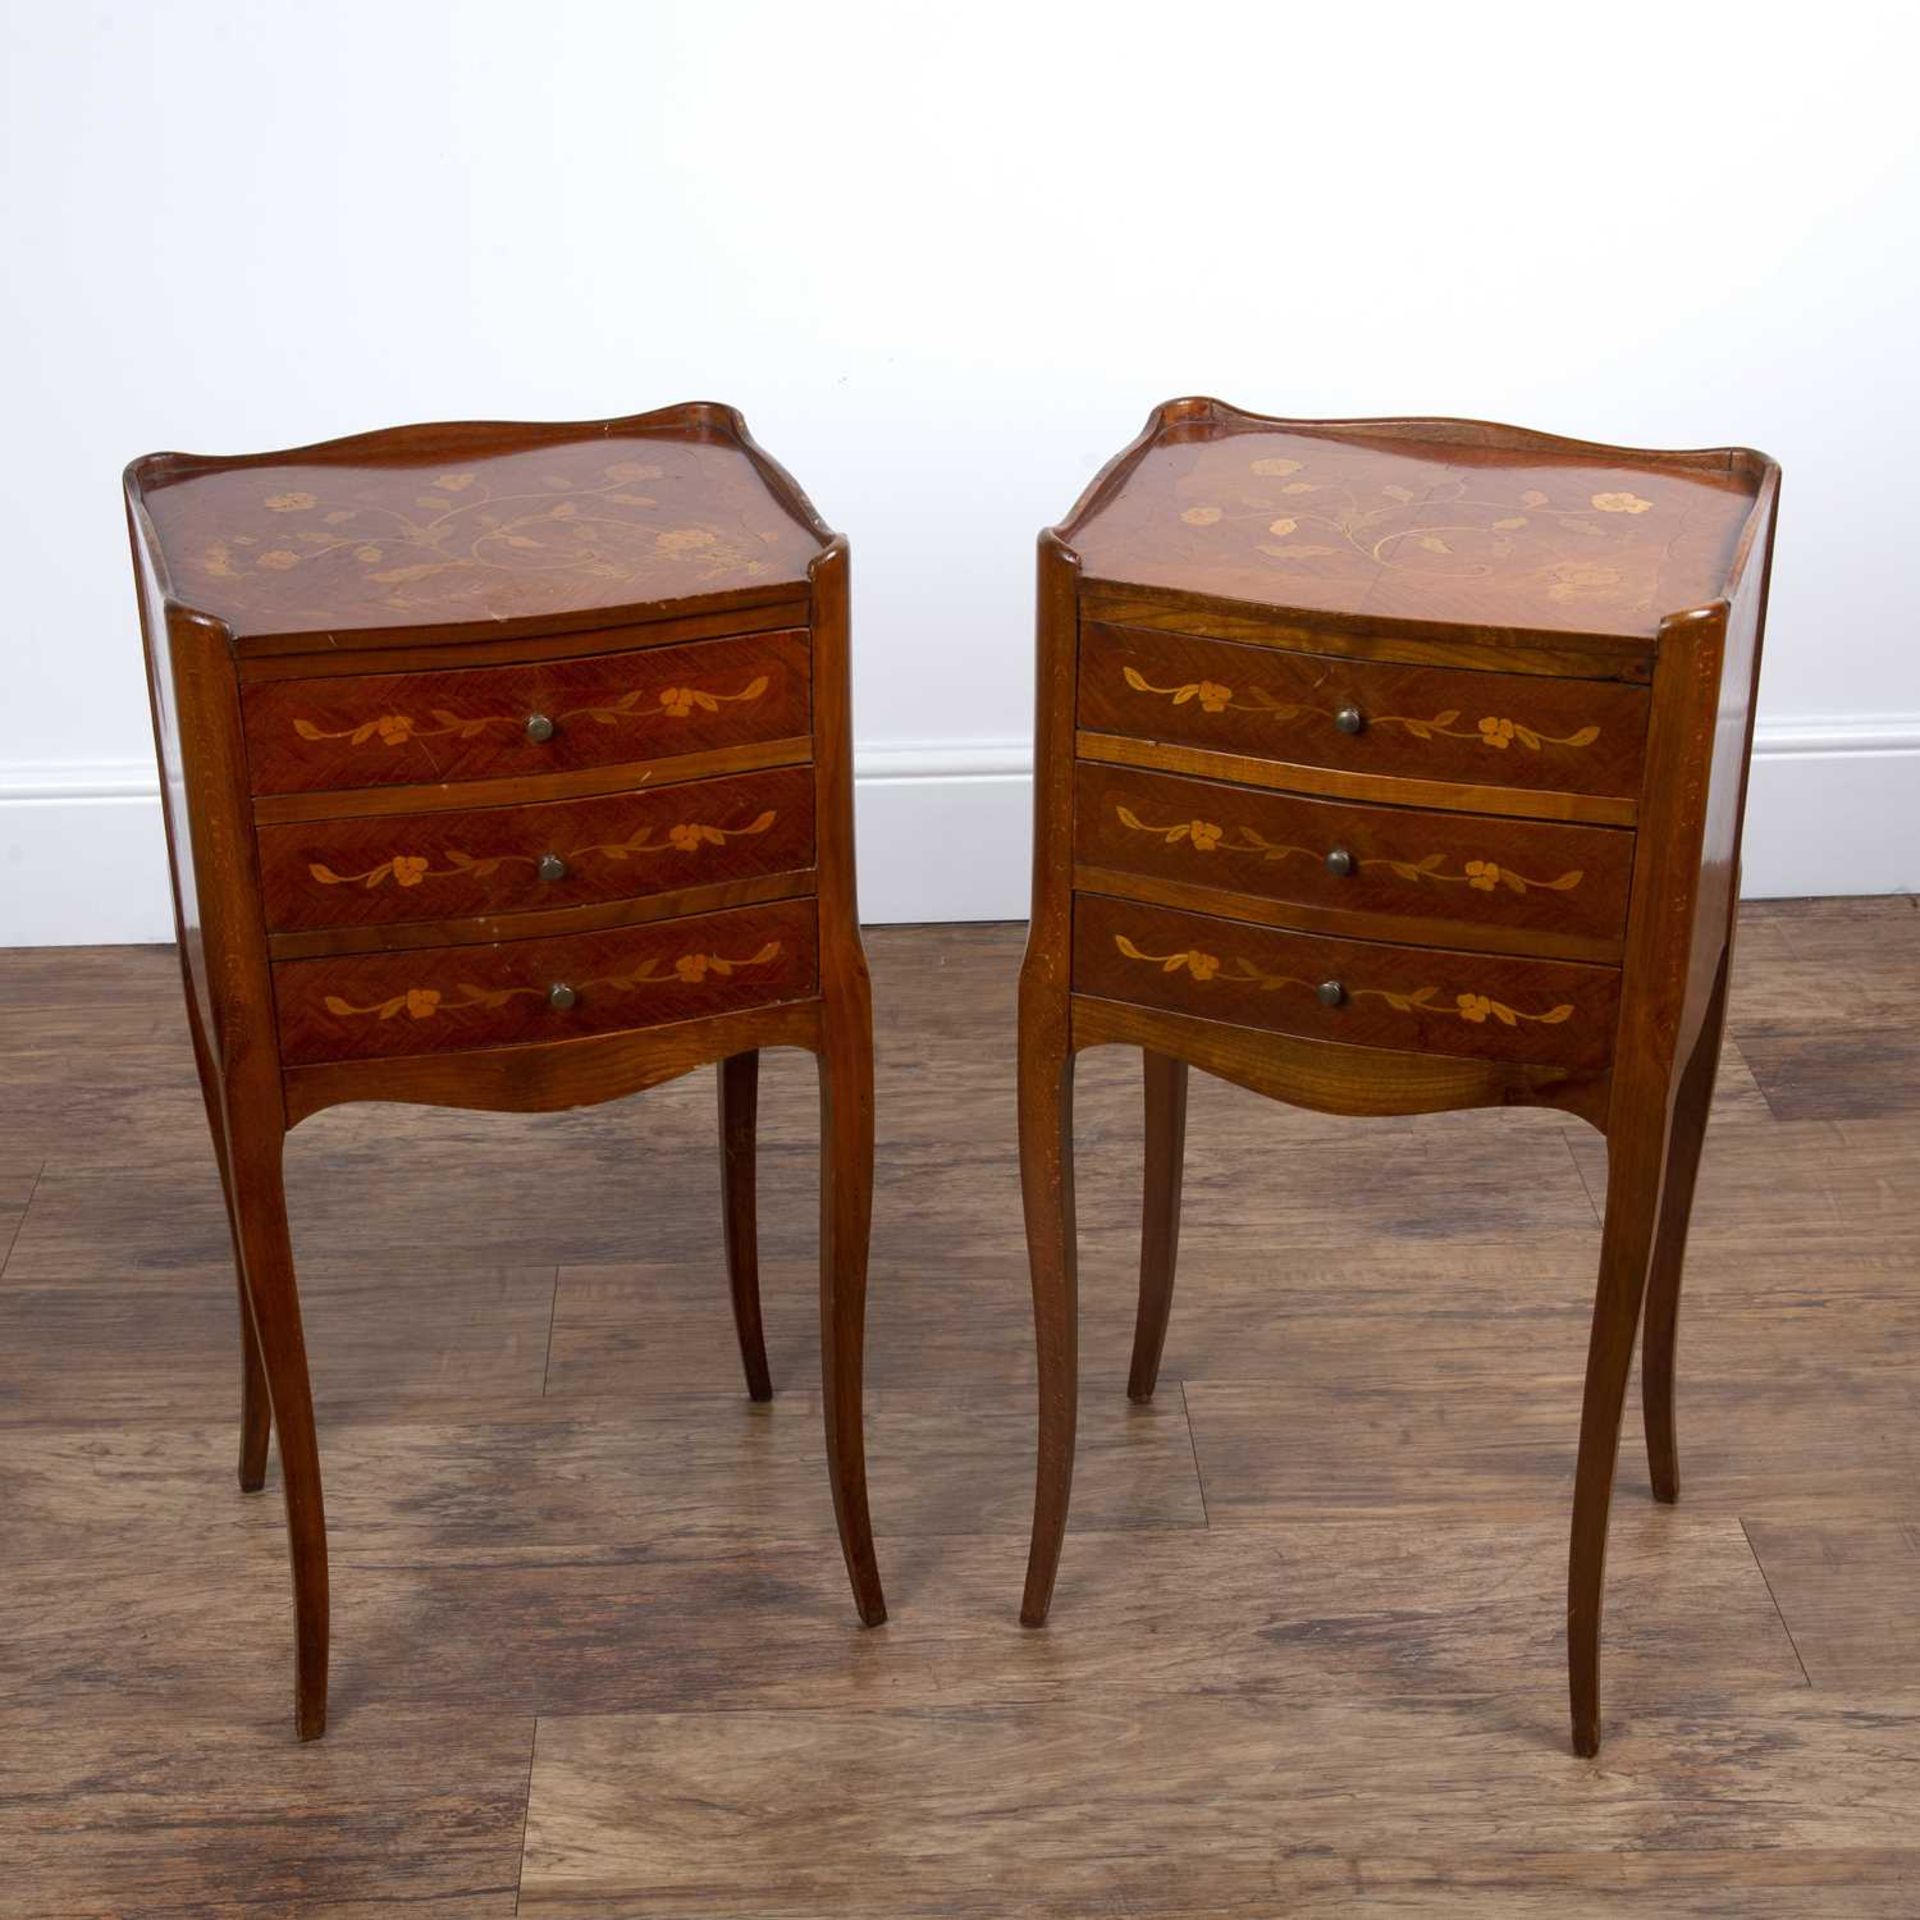 Pair of marquetry bedside table cabinets French style, each fitted with three drawers, 37cm wide x - Image 2 of 5